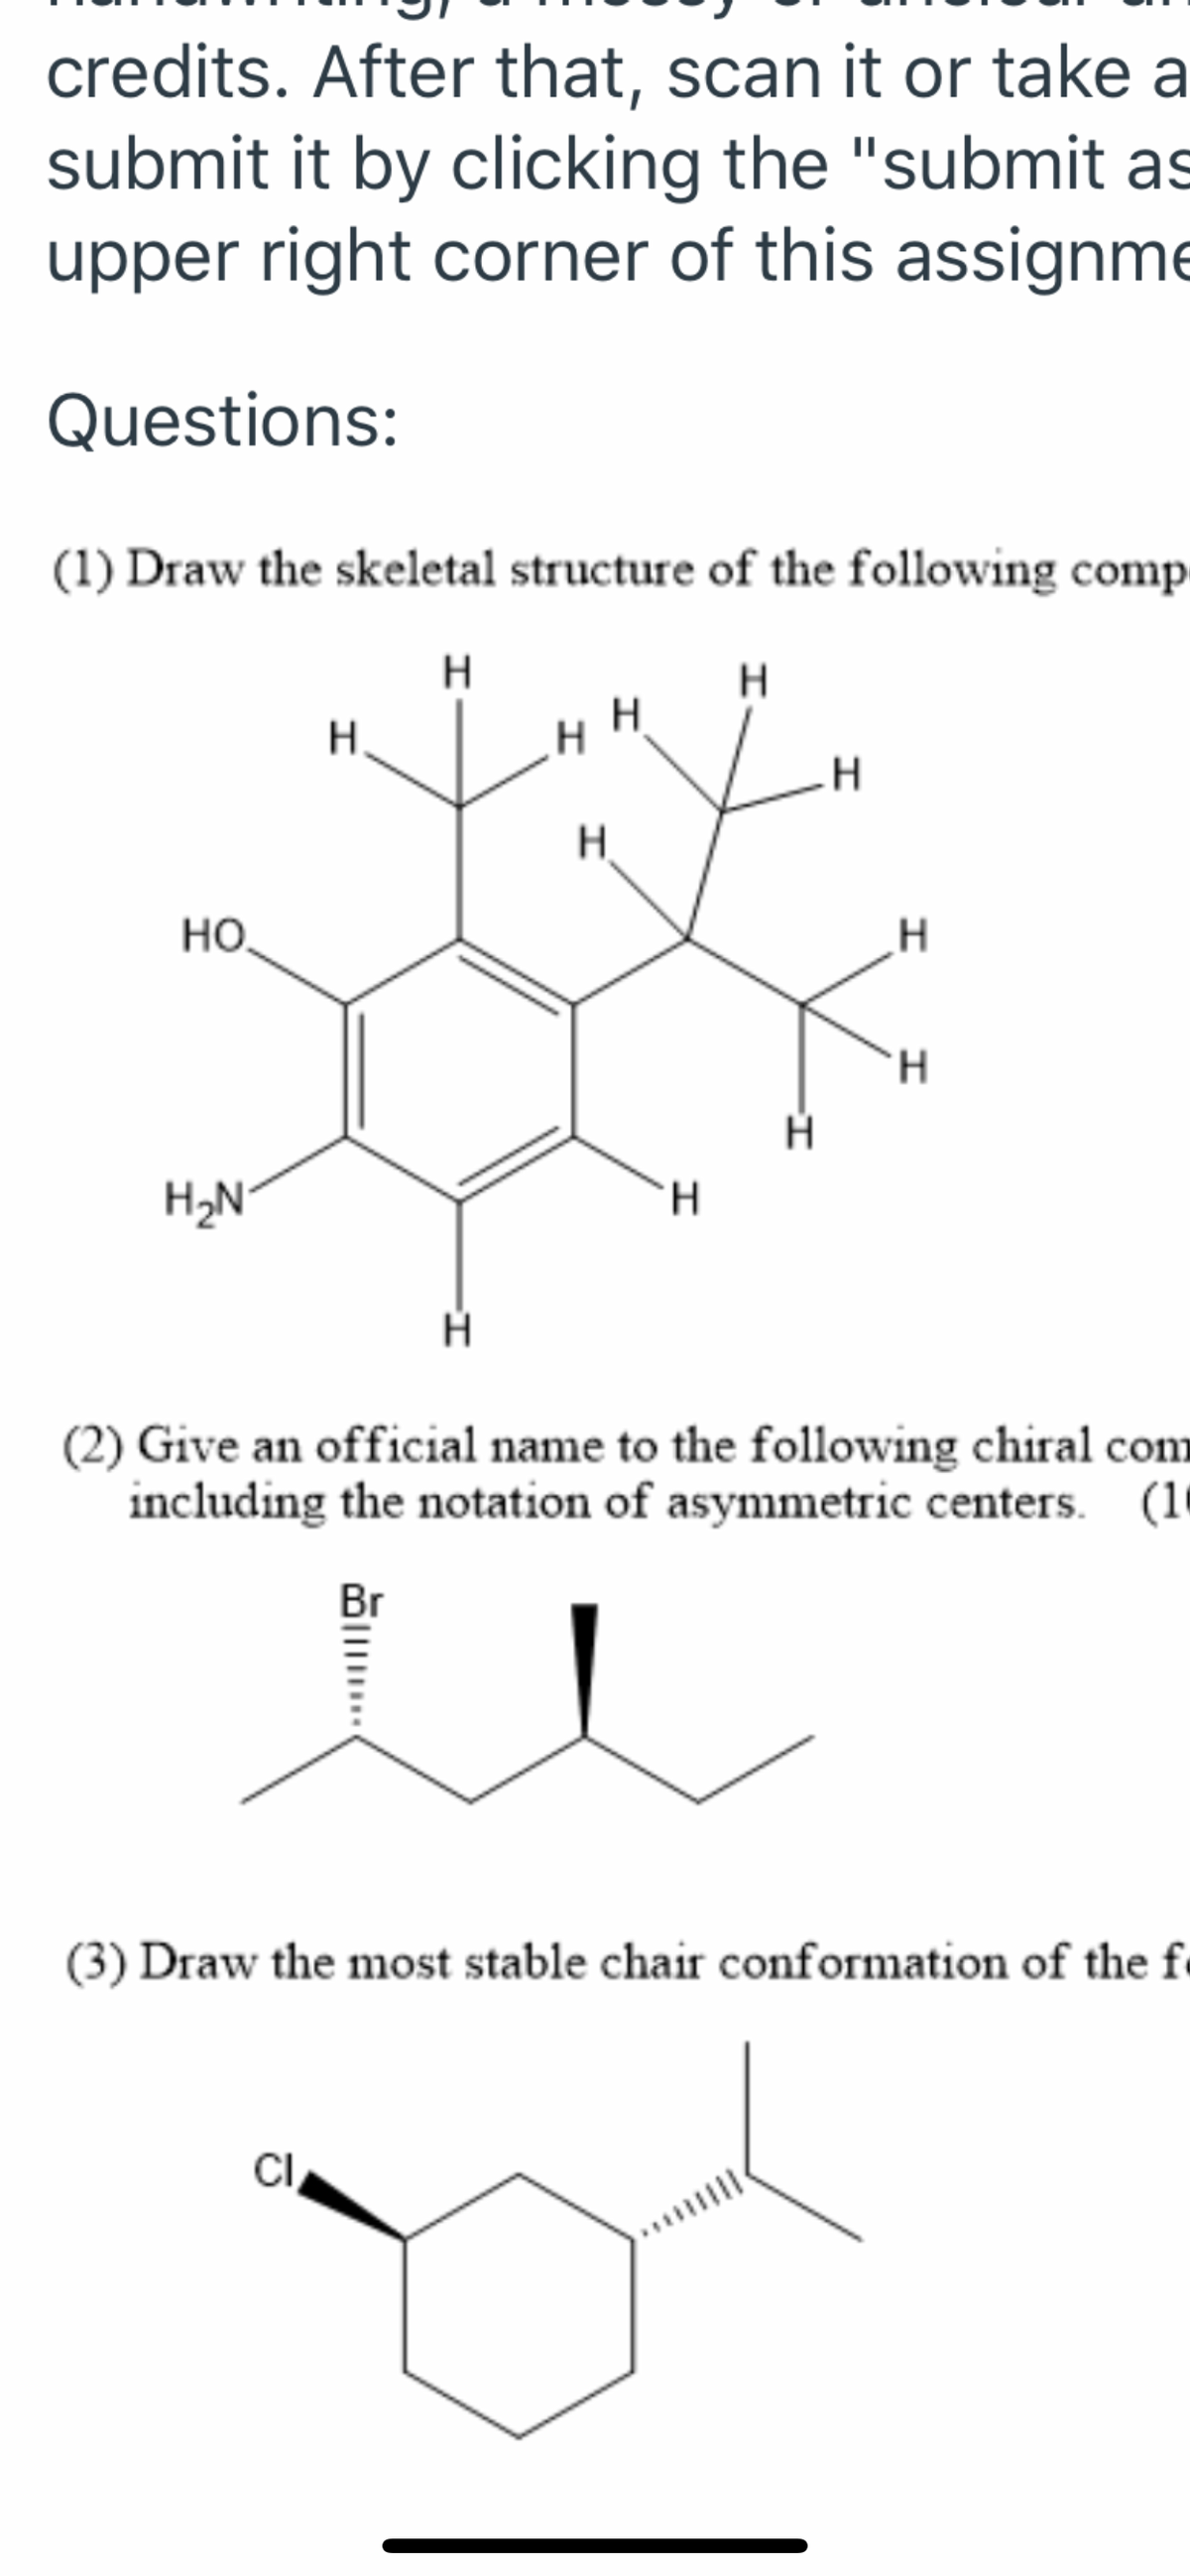 credits. After that, scan it or take a
submit it by clicking the "submit as
upper right corner of this assignme
Questions:
(1) Draw the skeletal structure of the following comp-
H
H.
Но.
H.
H.
H2N
H.
(2) Give an official name to the following chiral com
including the notation of asymmetric centers. (10
Br
(3) Draw the most stable chair conformation of the f
CI,
